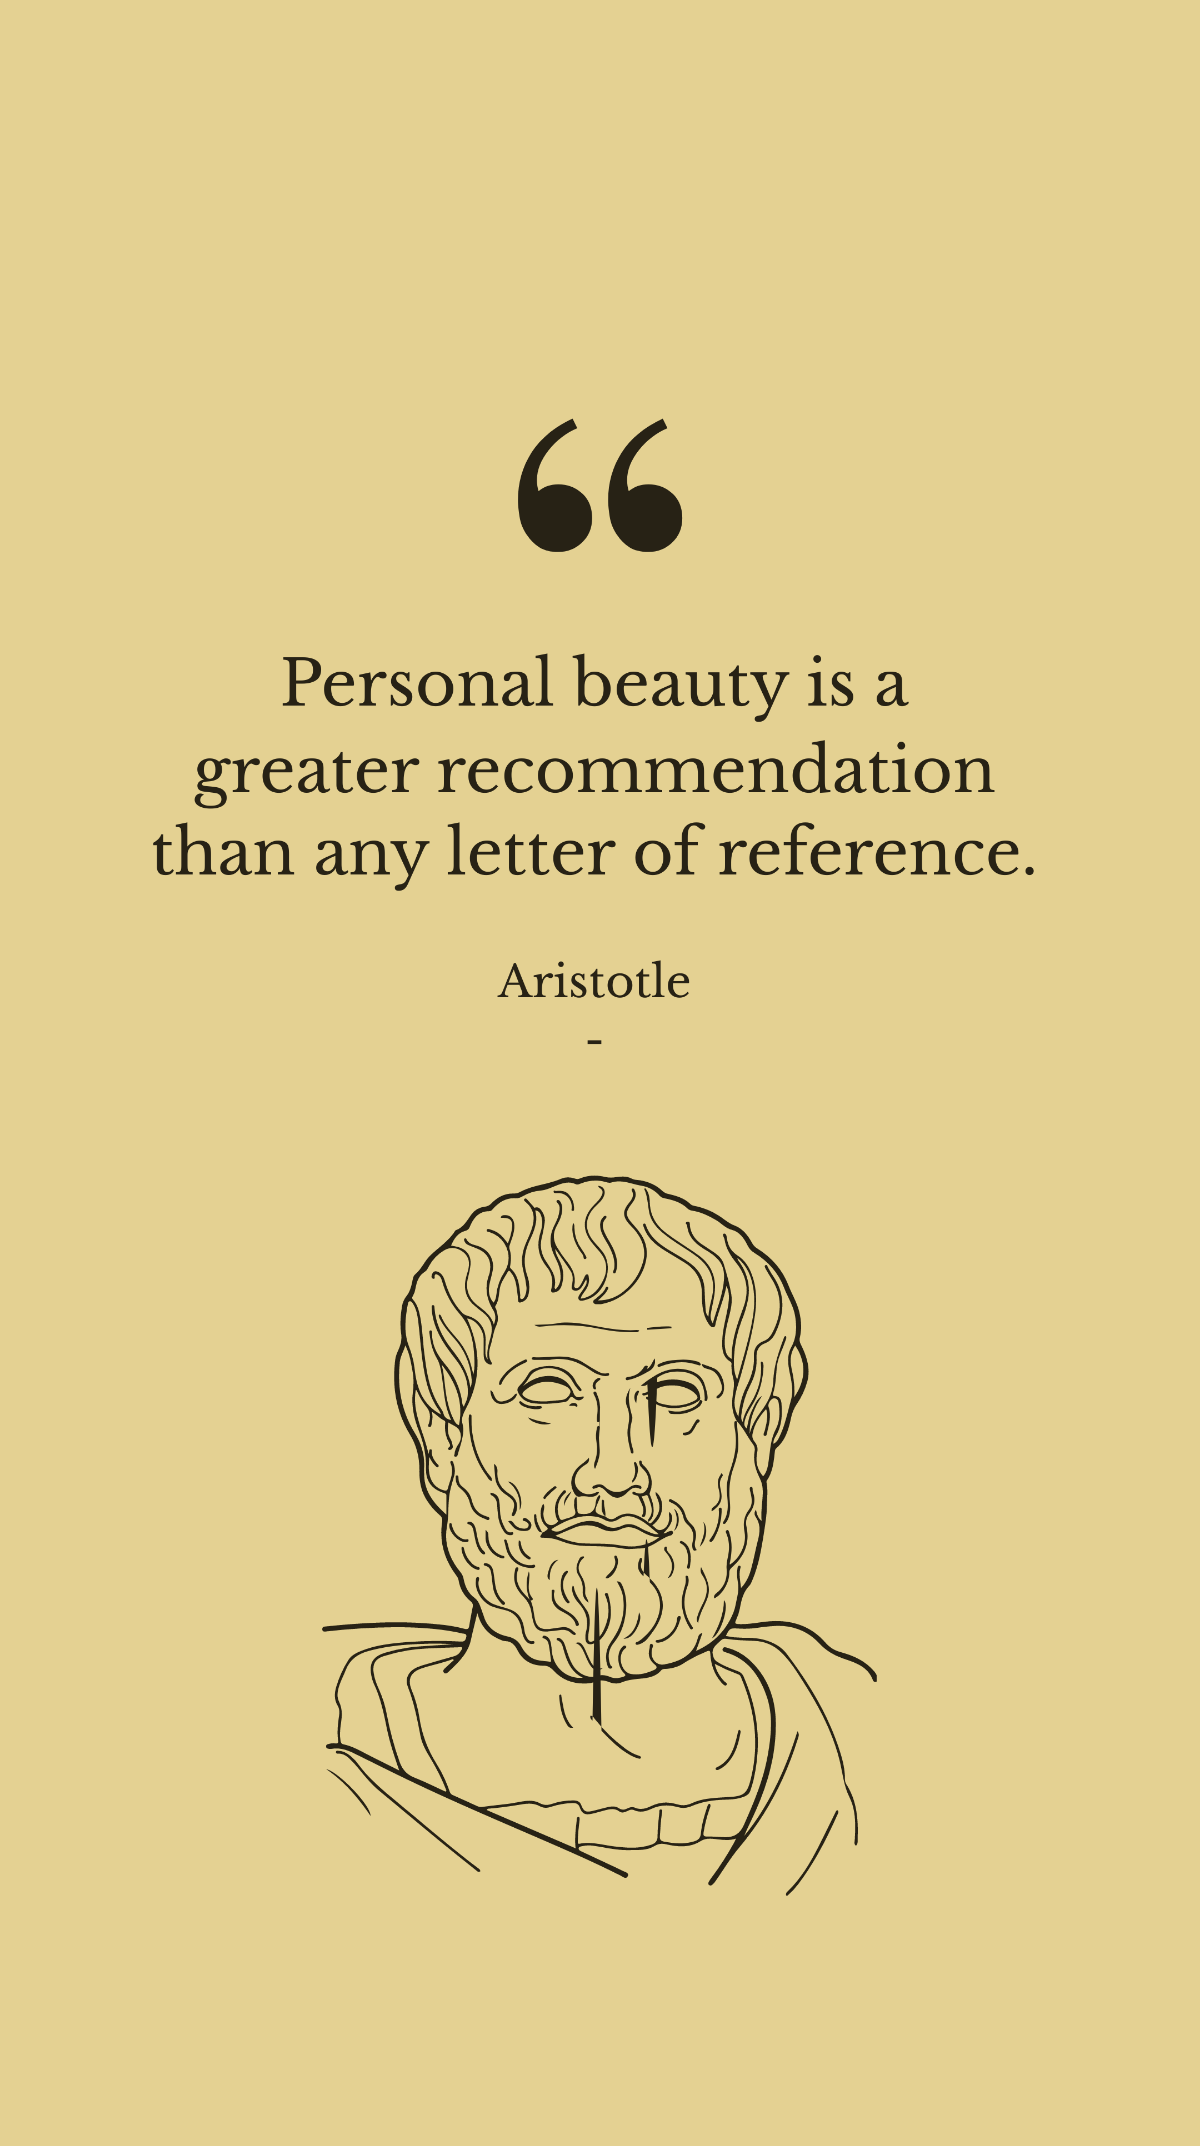 Free Aristotle - Personal beauty is a greater recommendation than any letter of reference. Template